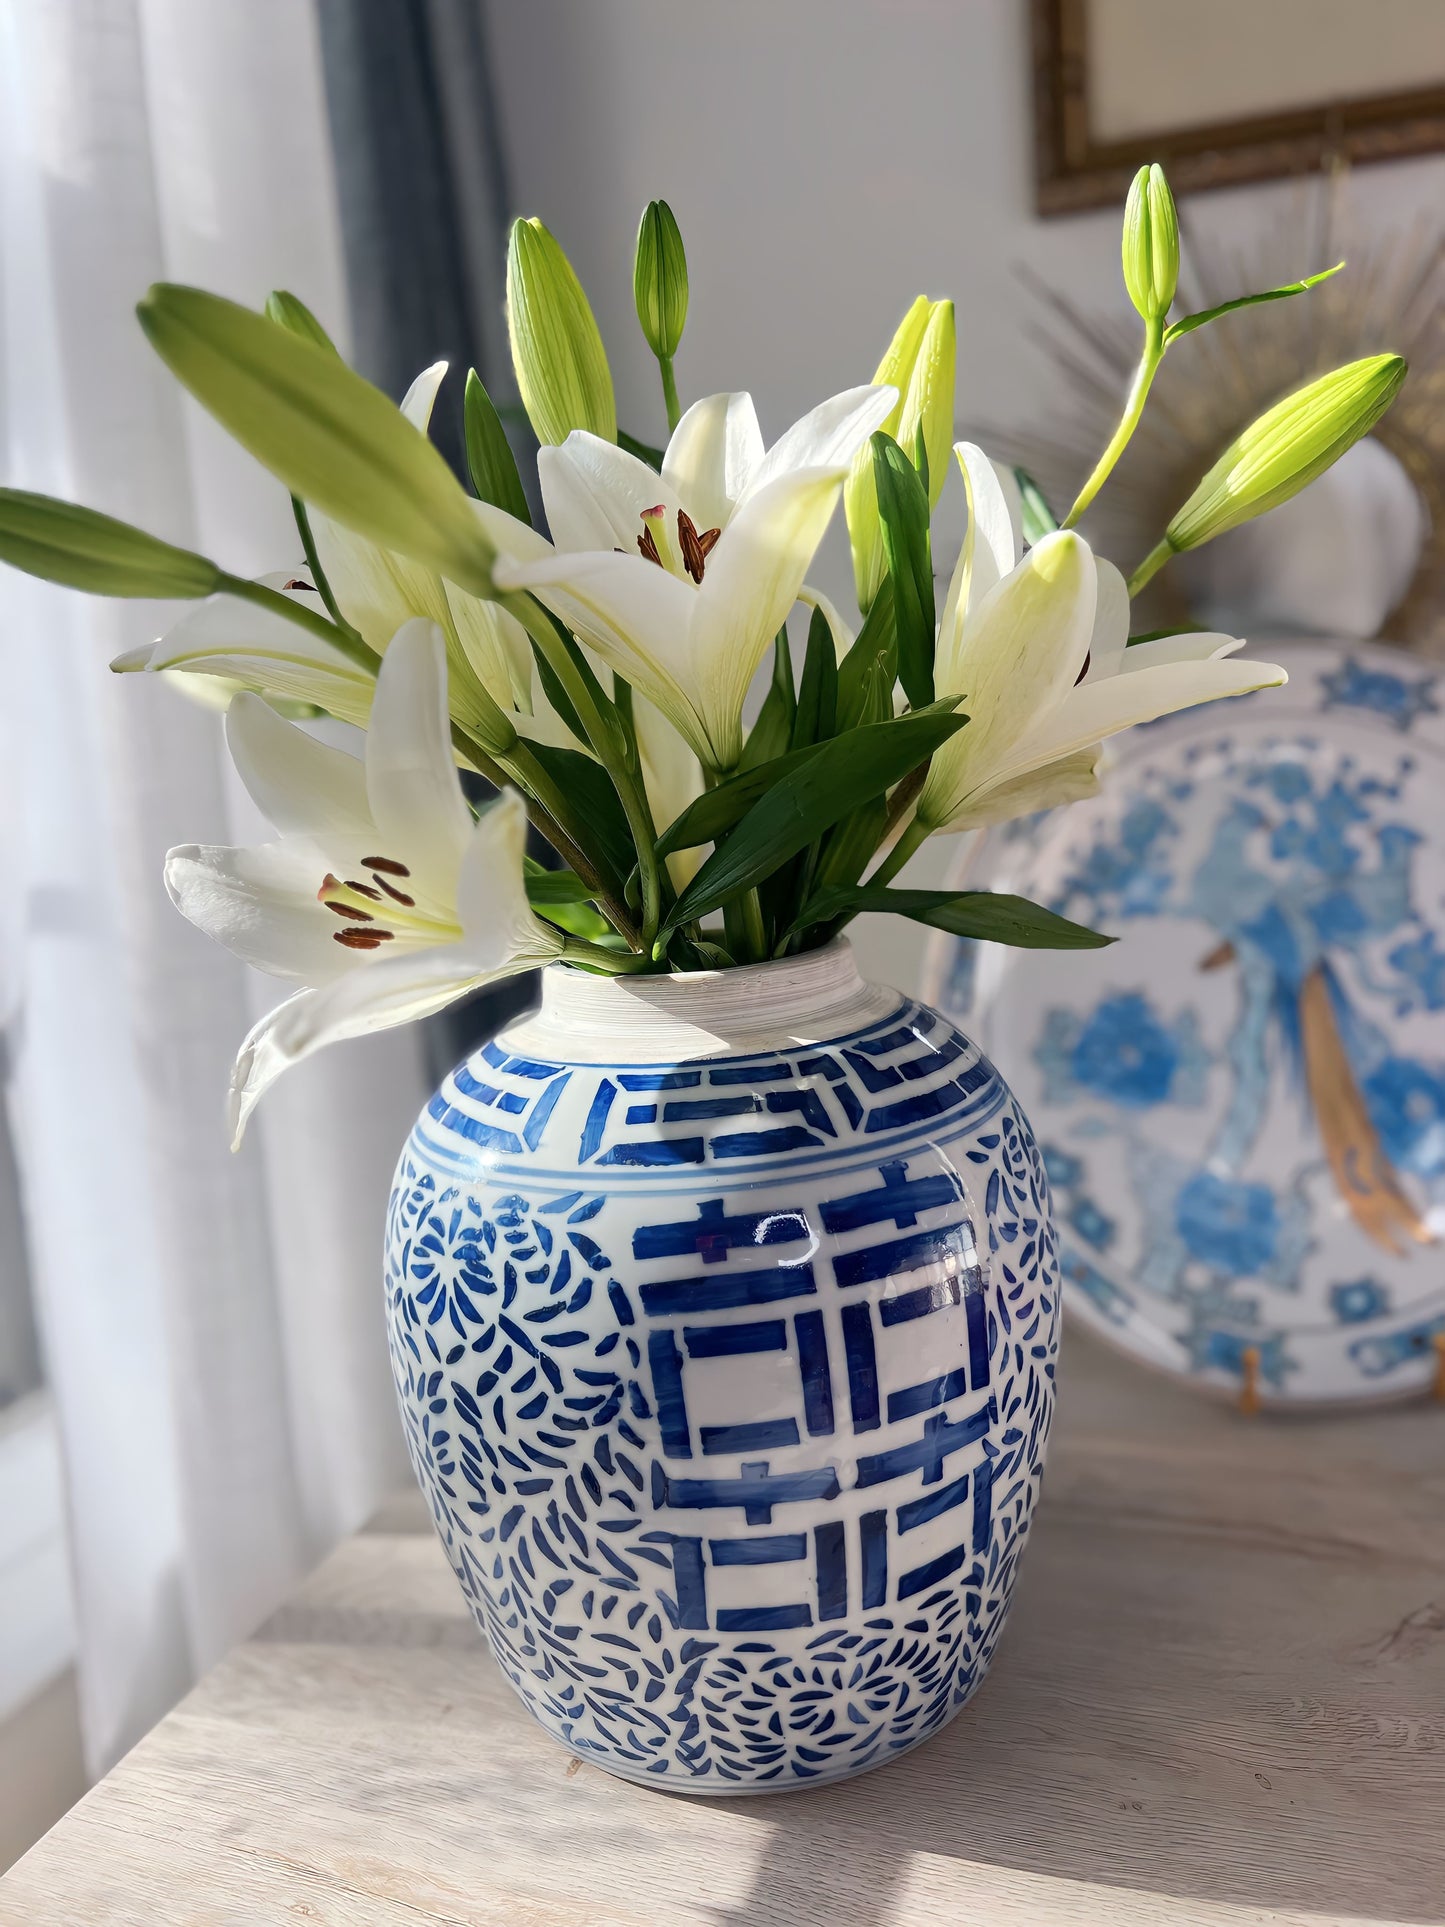 Classic Vintage Blue and White Happiness Ginger Jar Vase